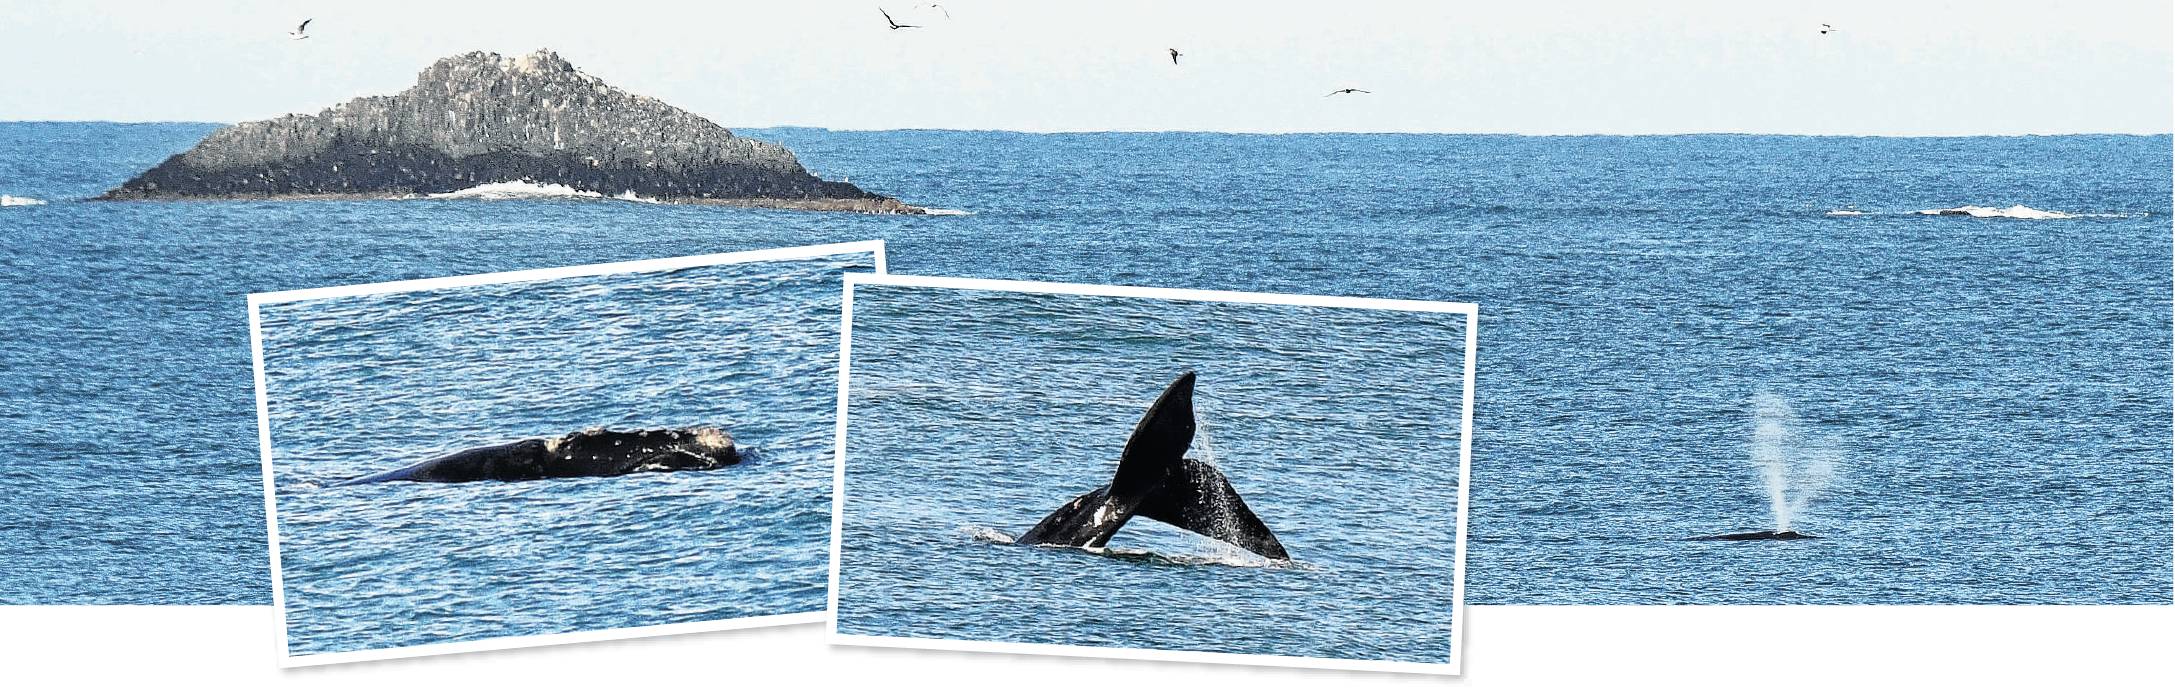 Winter visits by southern right whales | Otago Daily Times Online News